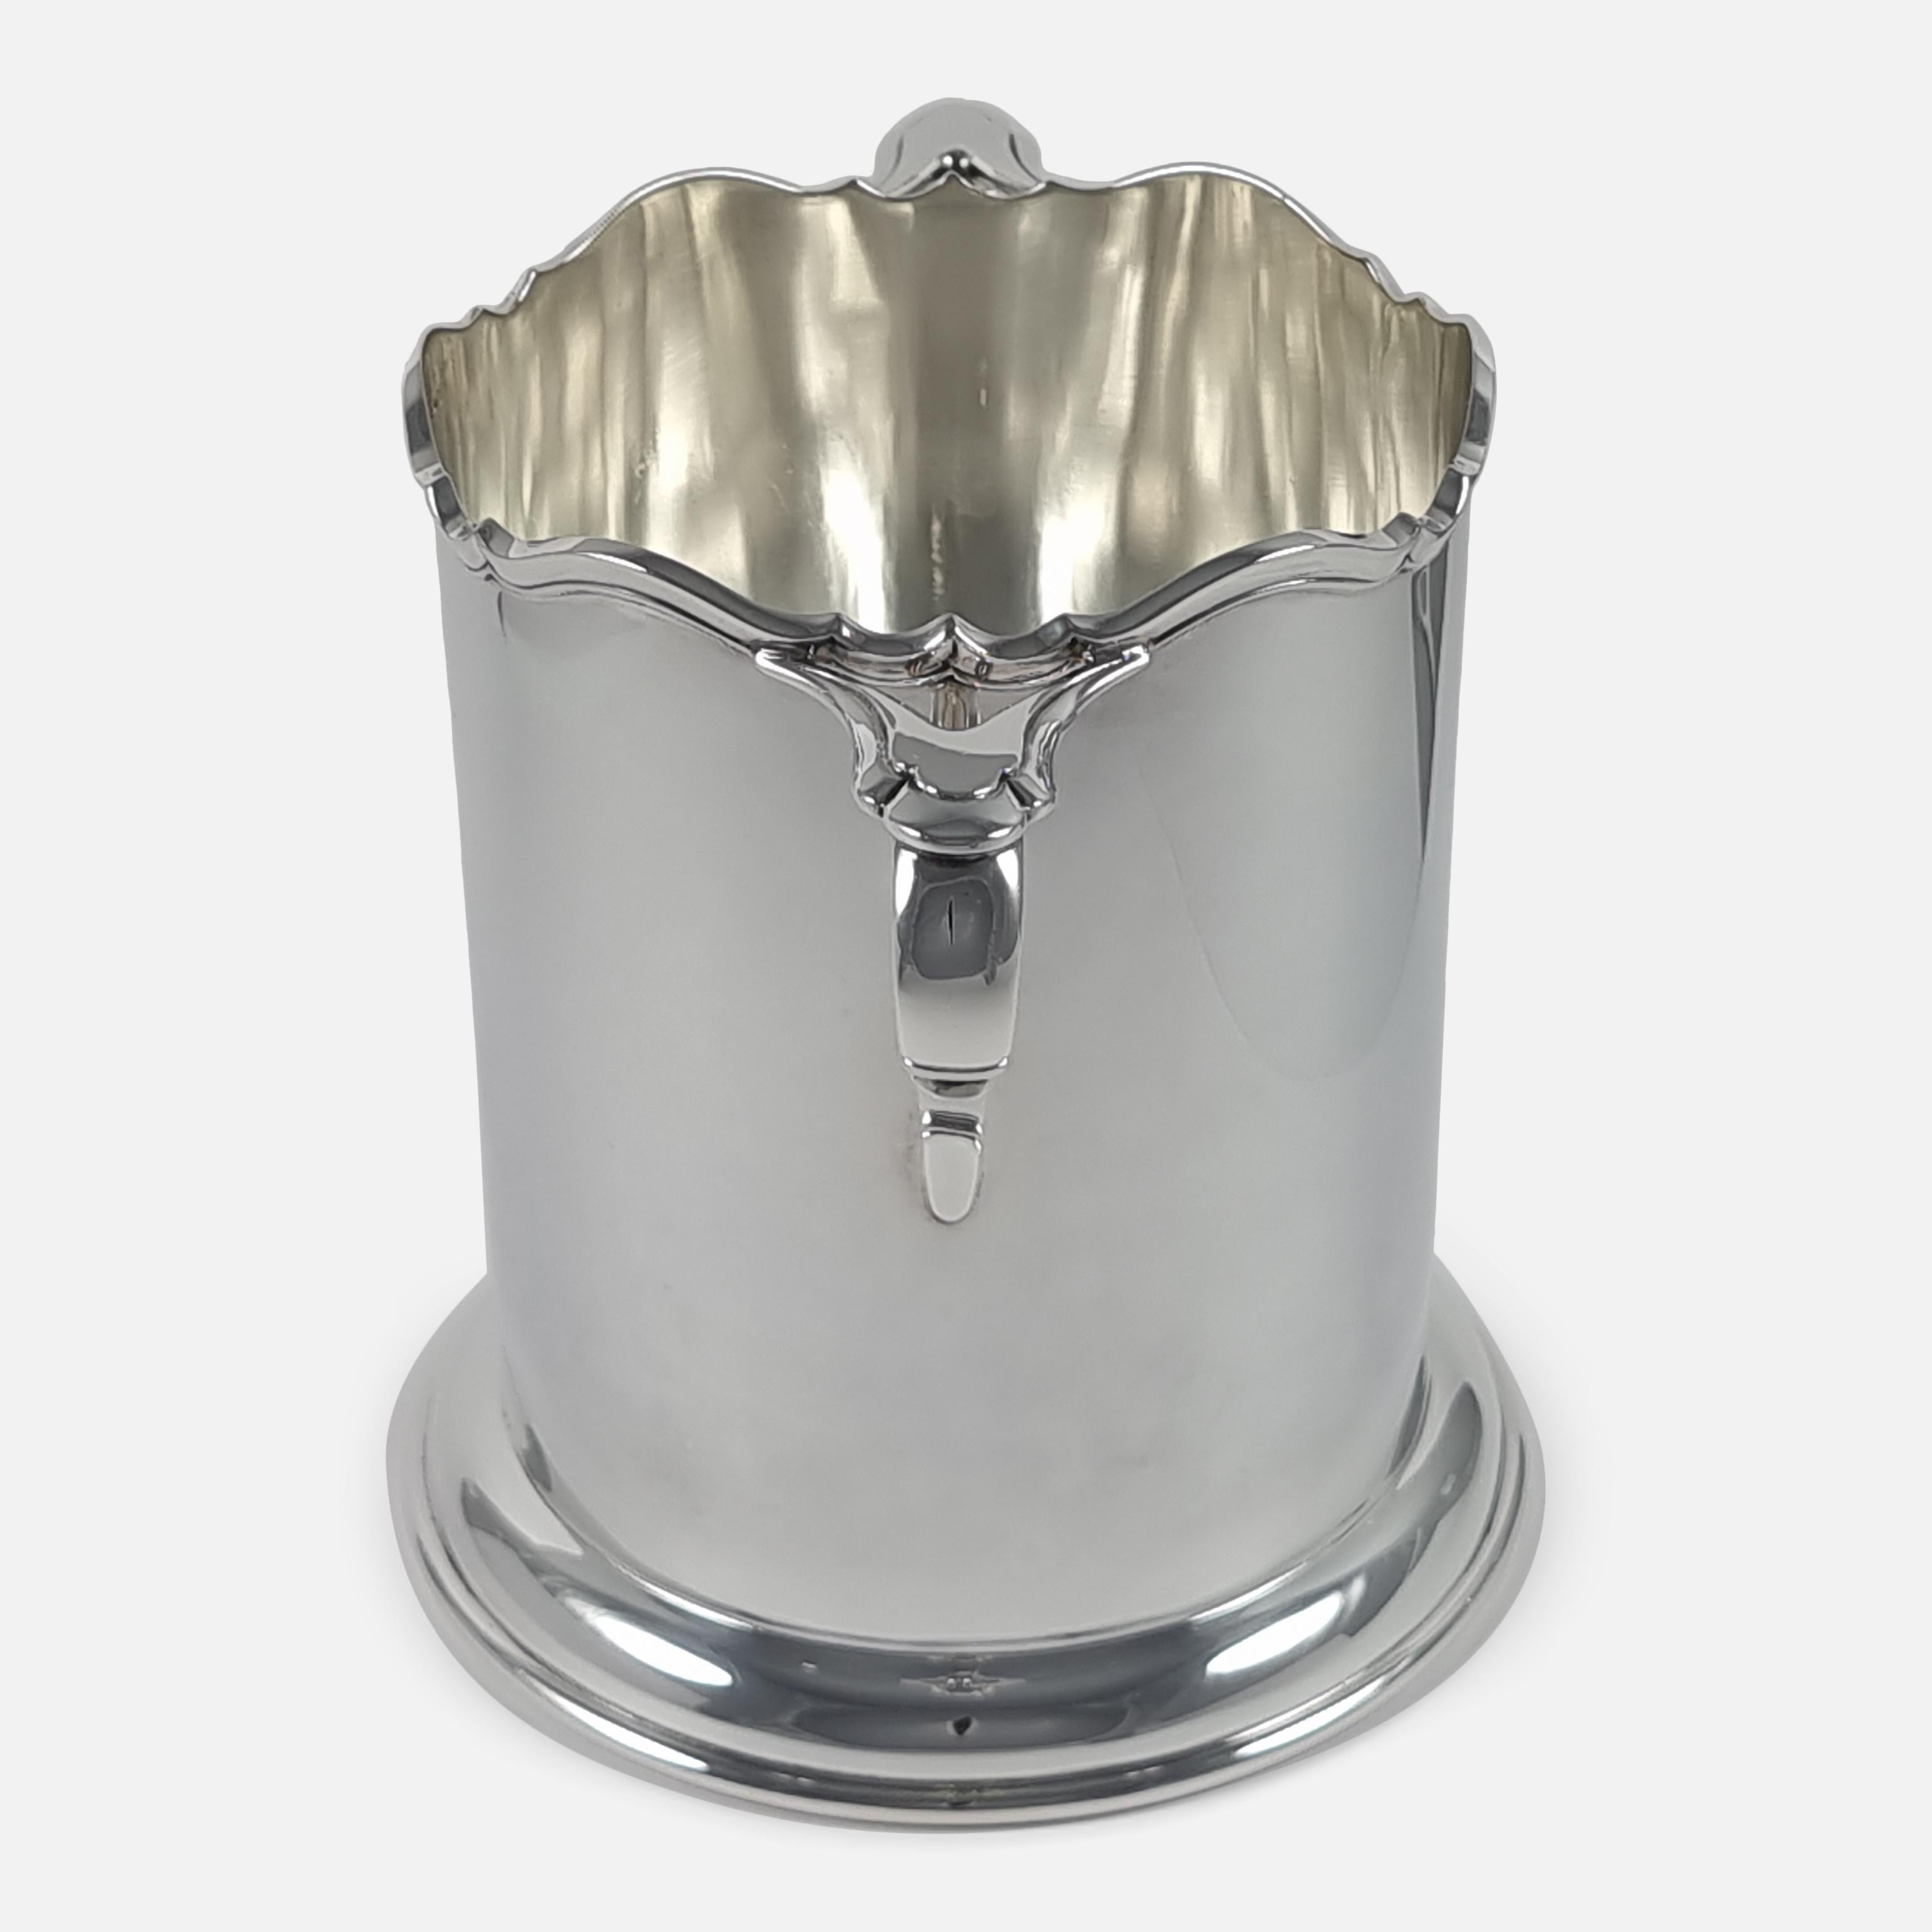 Edward VIII Sterling Silver Syphon Wine Bottle Holder, Atkin Brothers, 1936 In Good Condition For Sale In Glasgow, GB